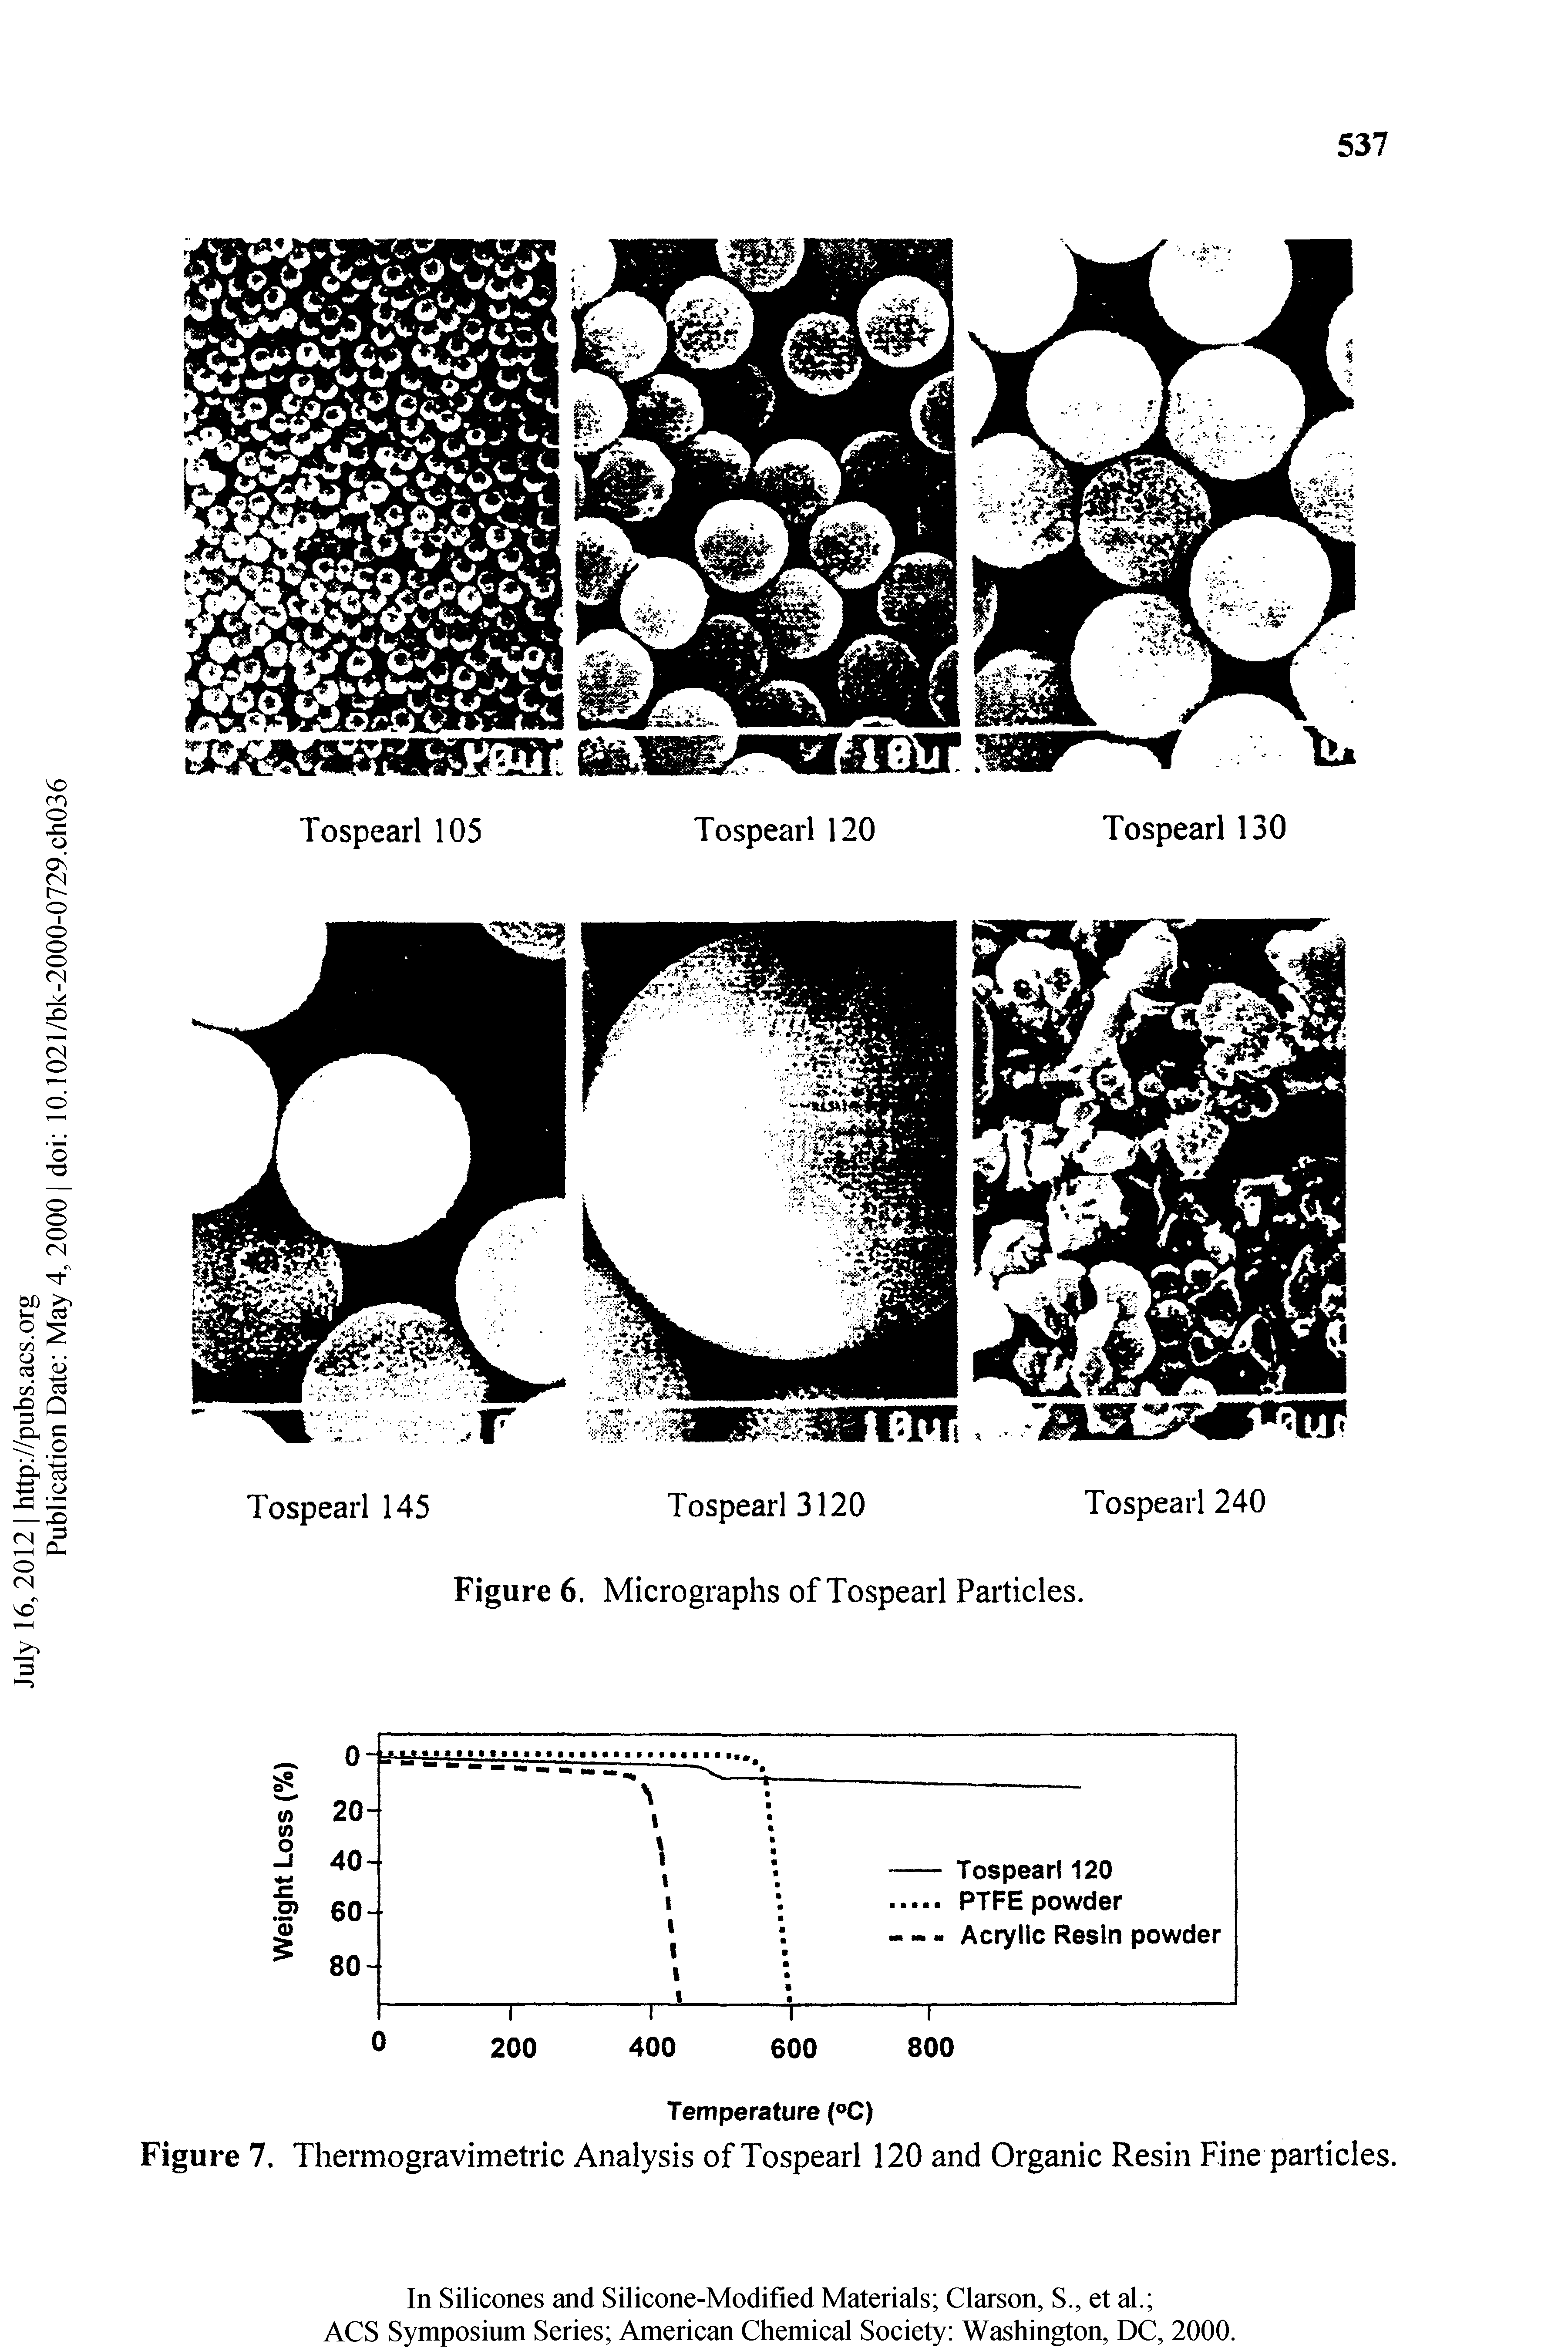 Figure 7. Thermogravimetric Analysis of Tospearl 120 and Organic Resin Fine particles.